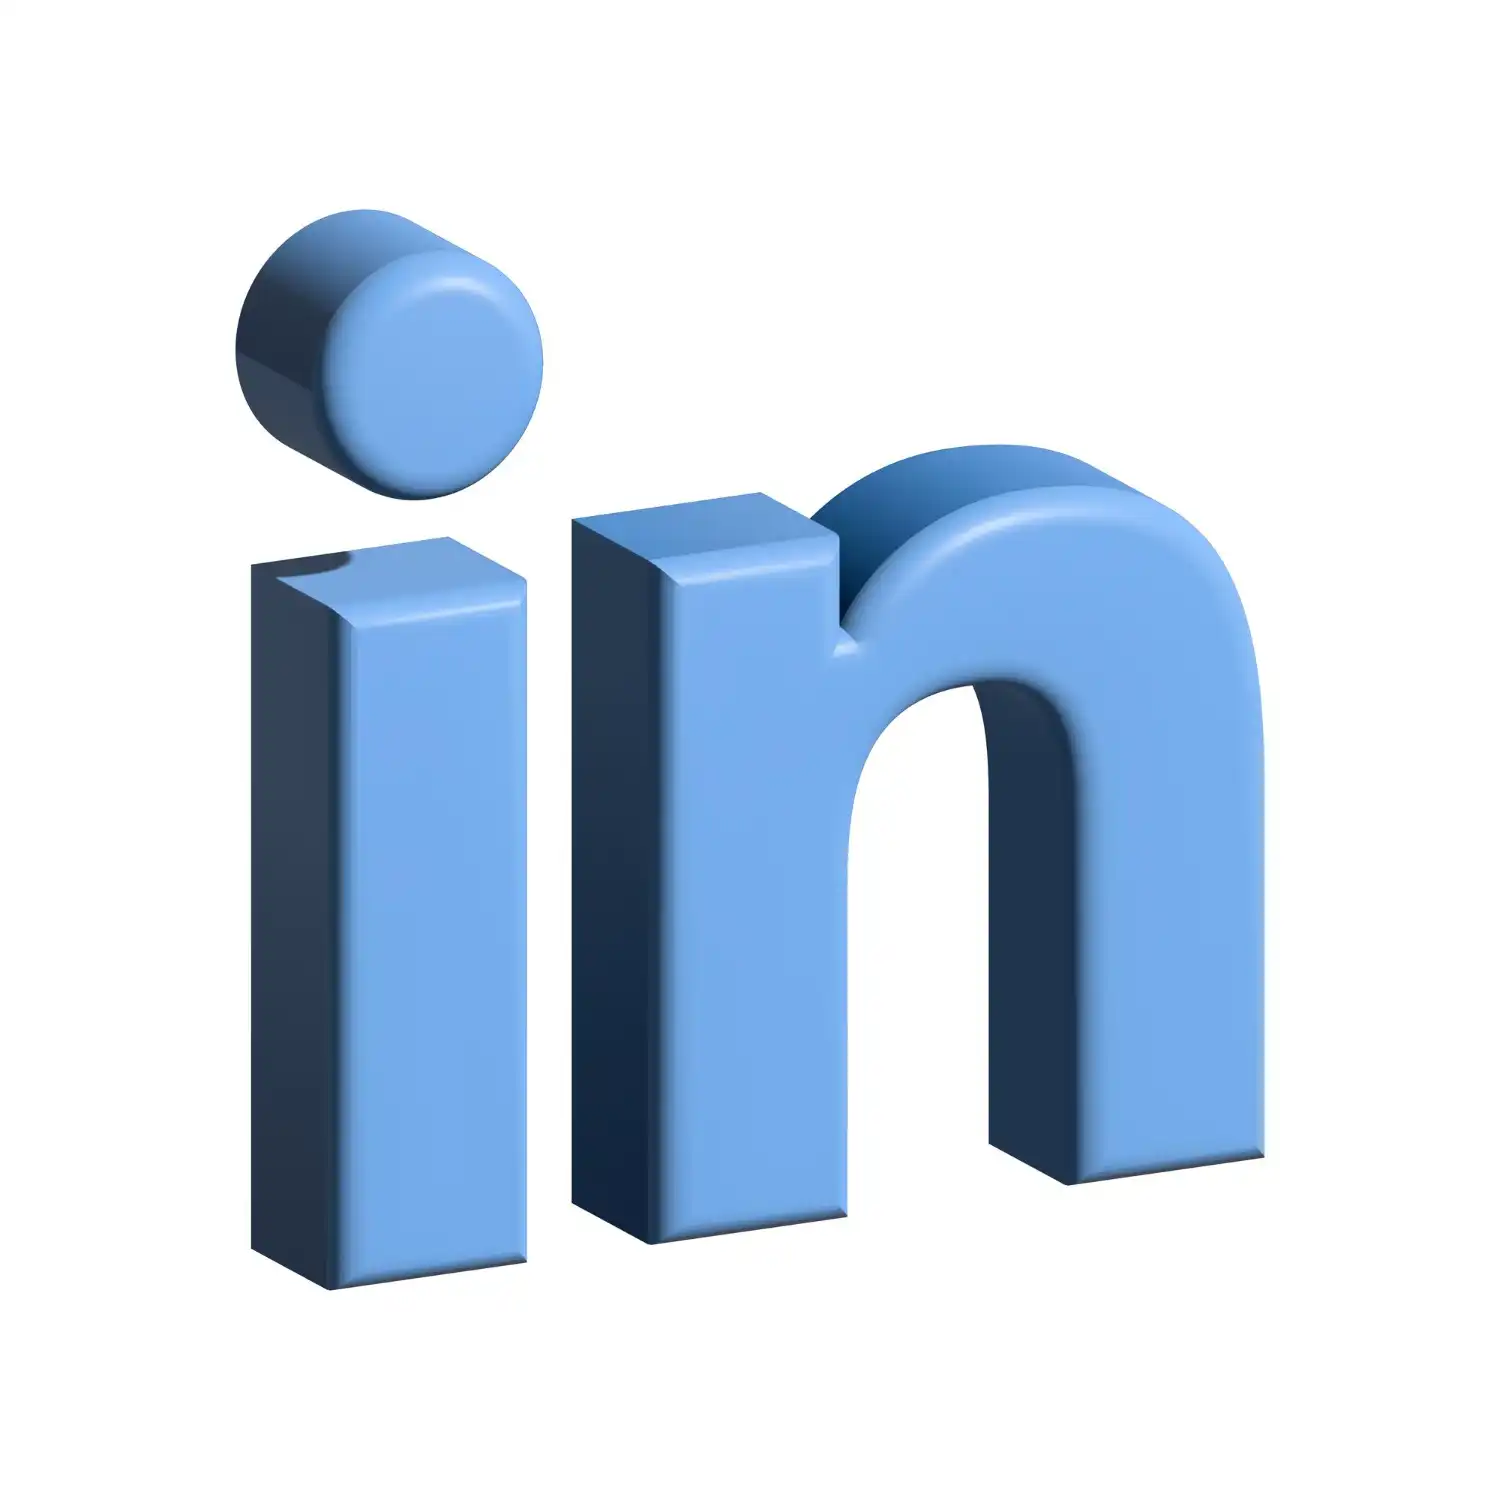 A Beginner's Guide to LinkedIn Ads